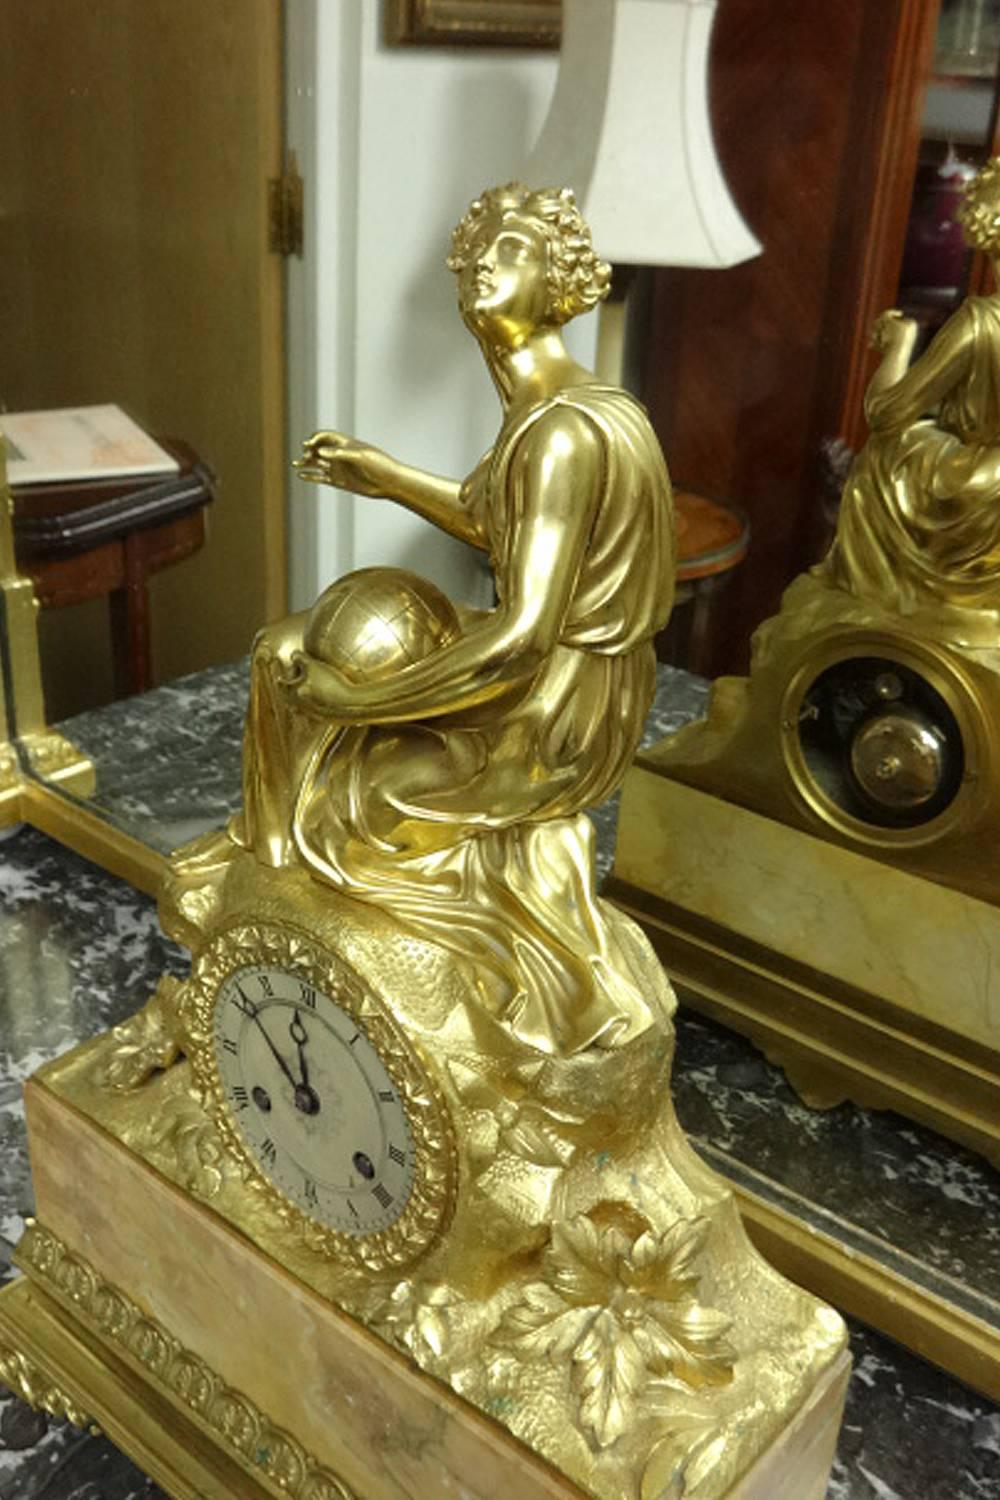 Stunning Gilt Bronze Mantle Clock by 'Gillion' In Good Condition For Sale In Applyby Magna, Staffordshire